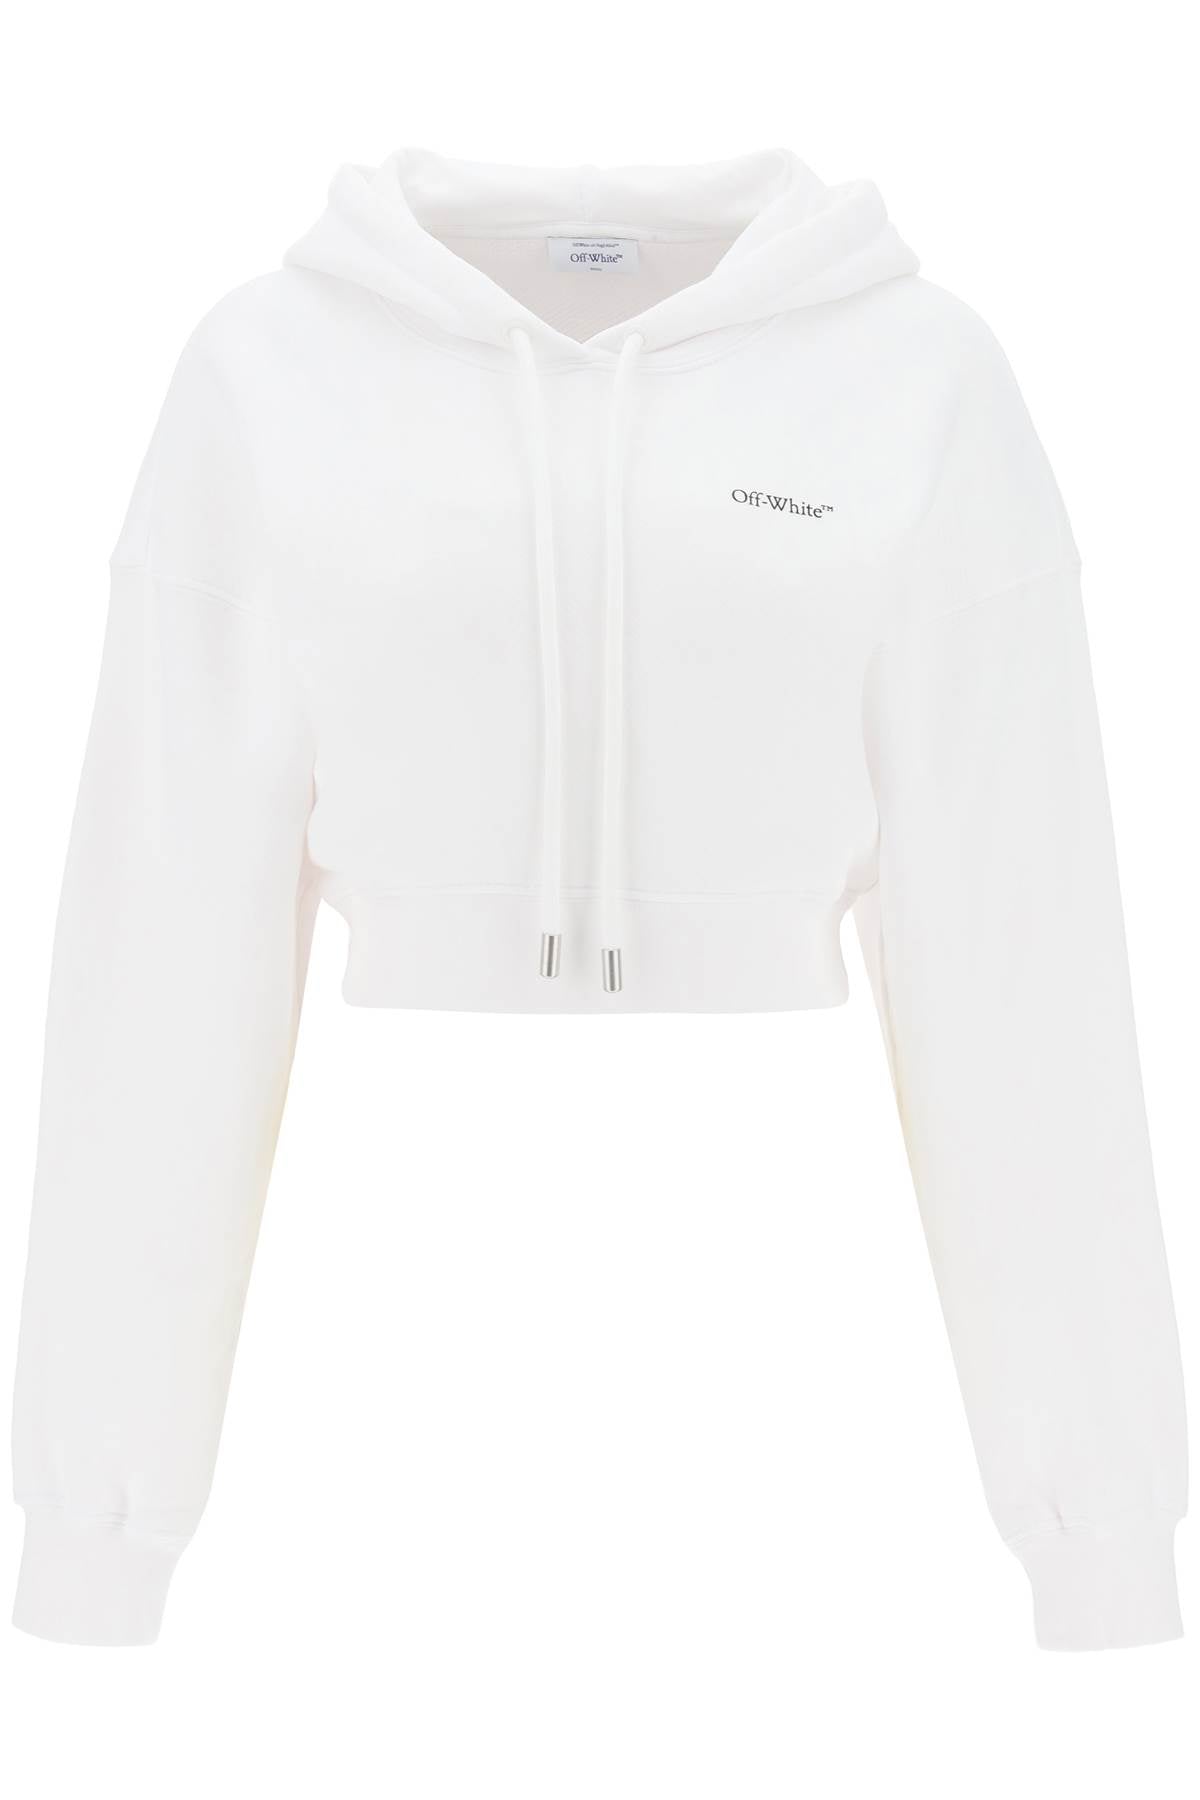 Off-white x-ray arrow cropped hoodie-0